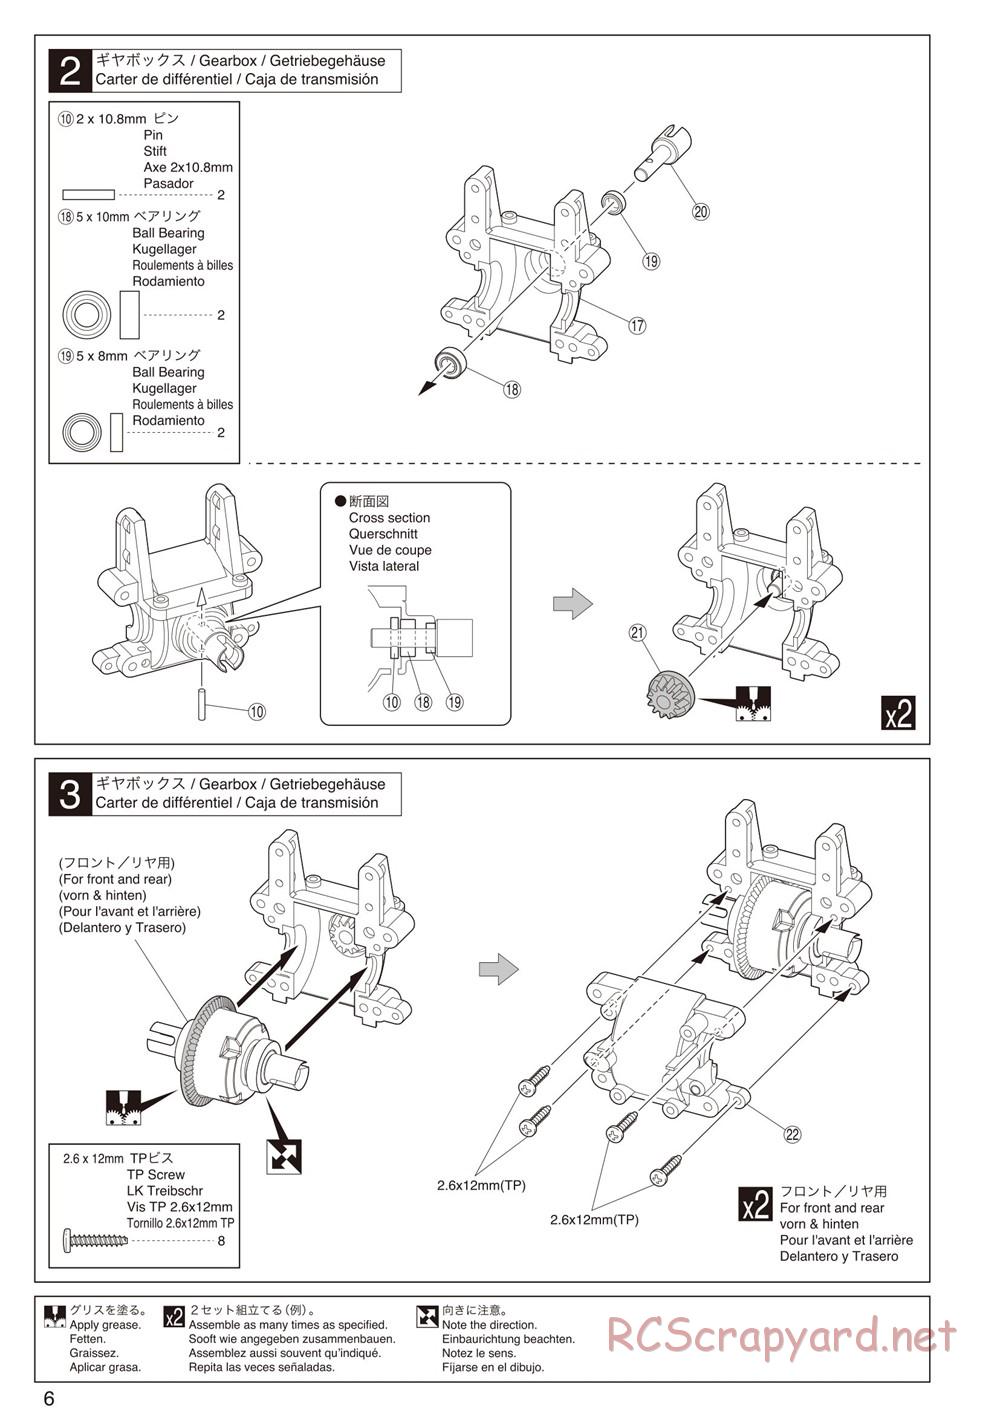 Kyosho - DRX - Manual - Page 6